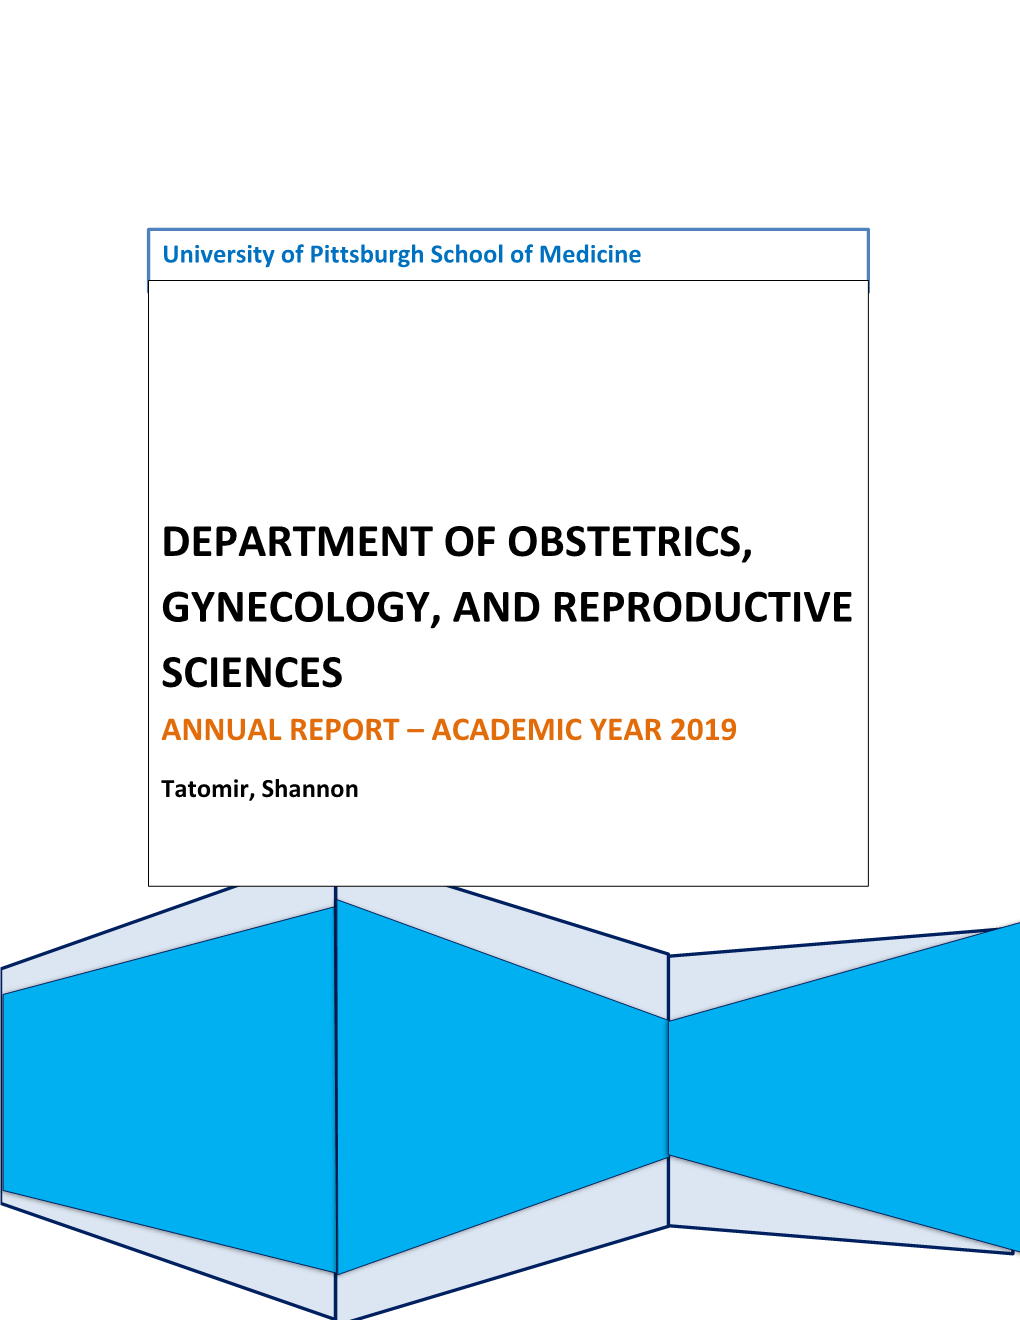 Department of Obstetrics, Gynecology, and Reproductive Sciences